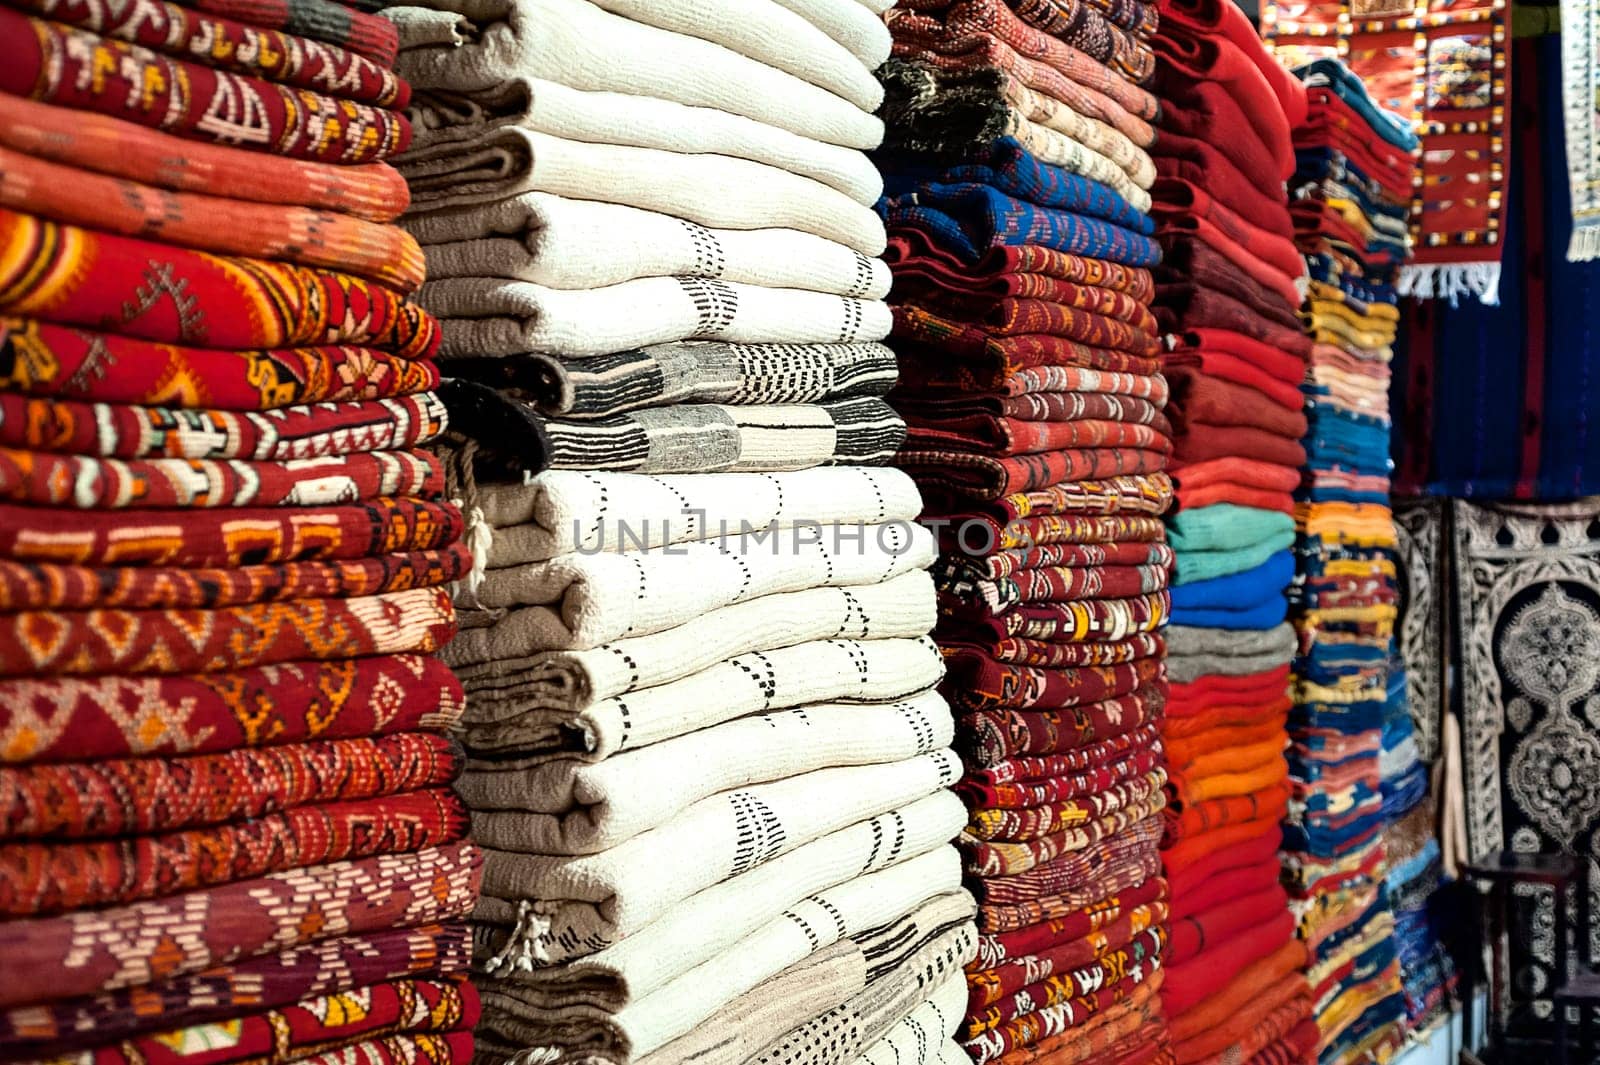 Carpets for sale in the Souk of Marrakech, Morocco